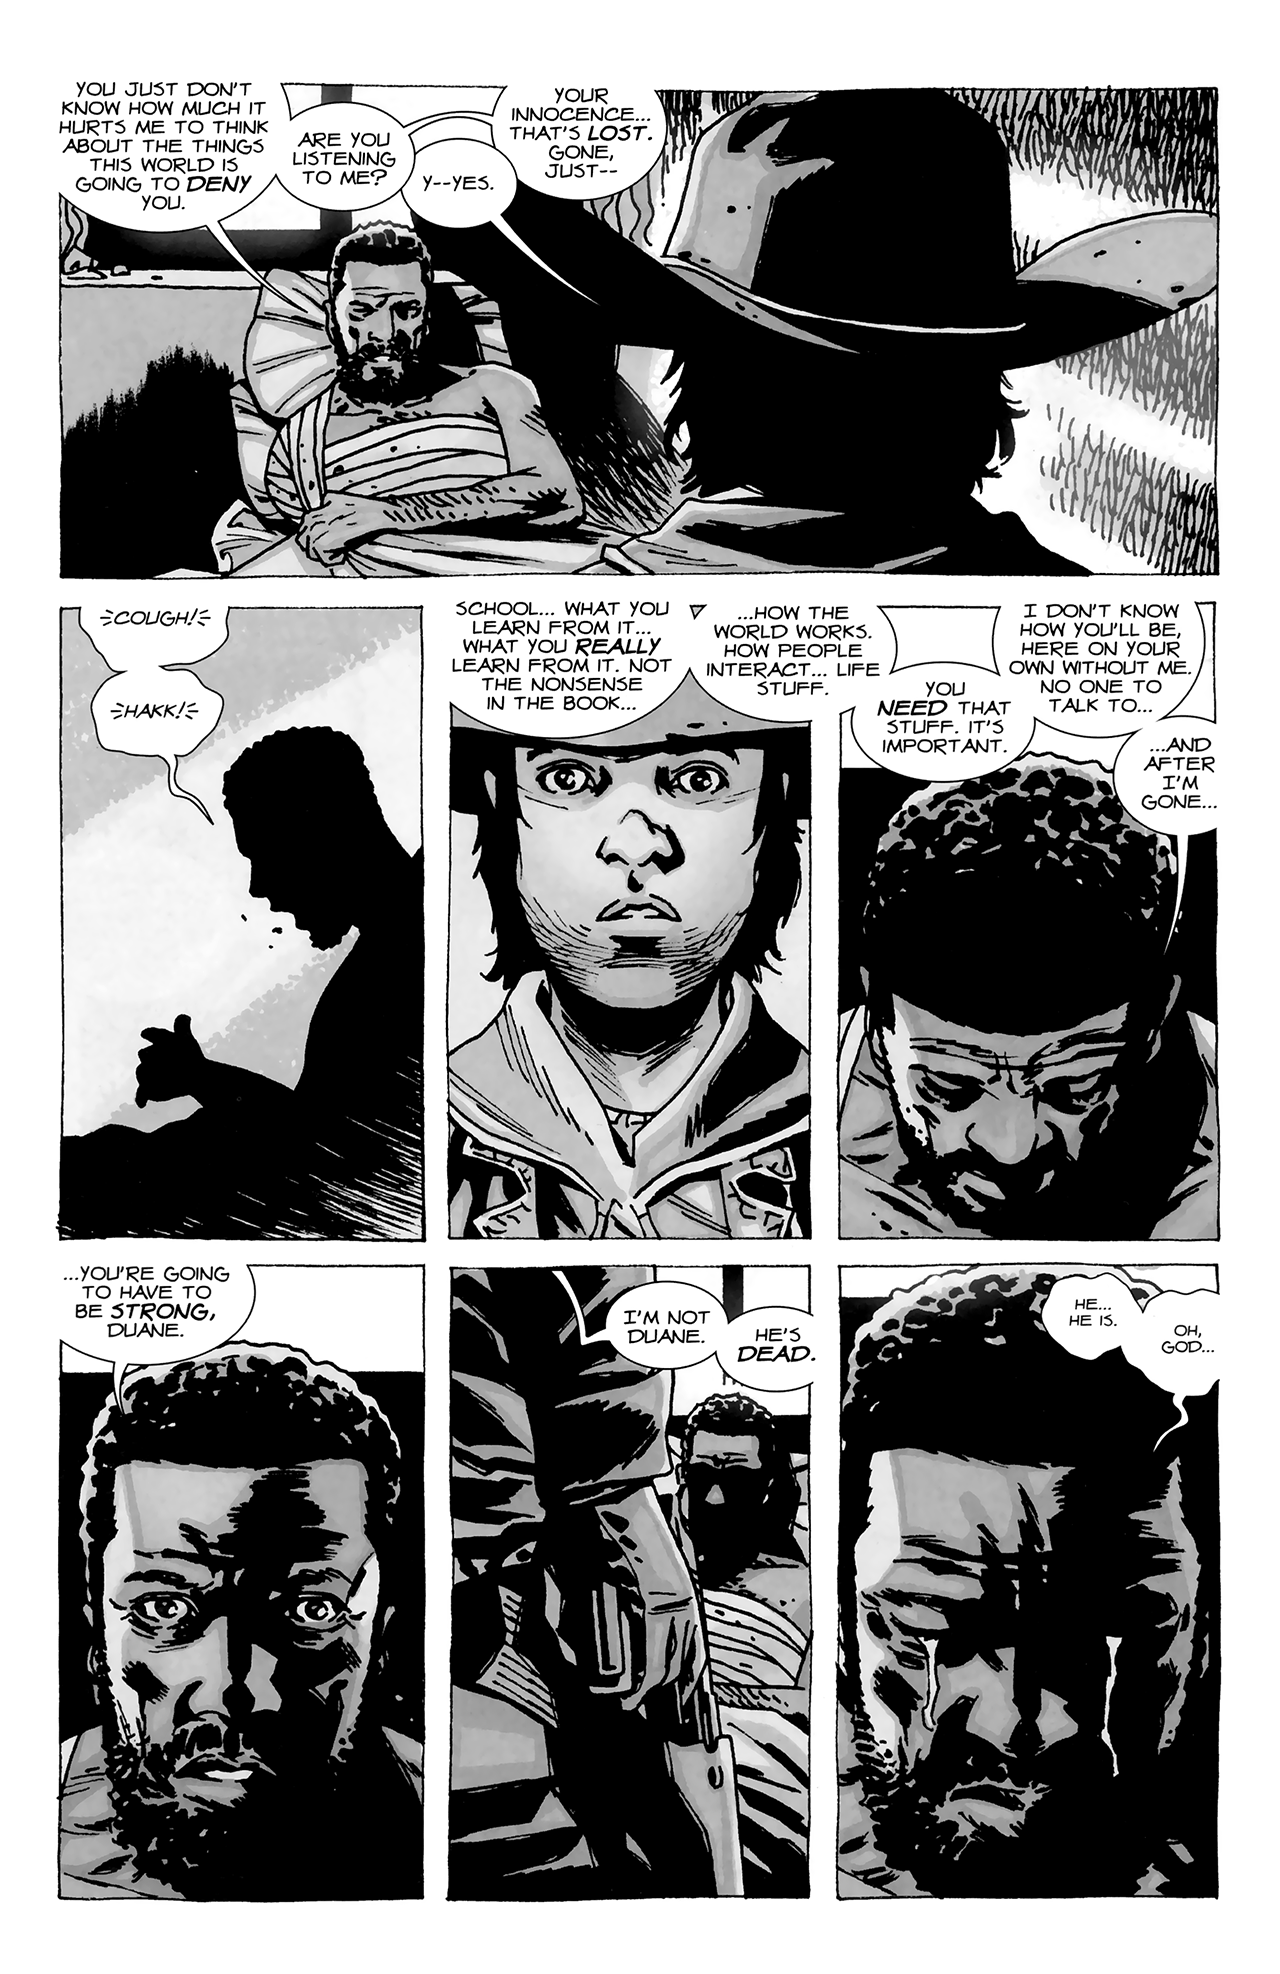 The Walking Dead #82 - NO WAY OUT, PART THREE